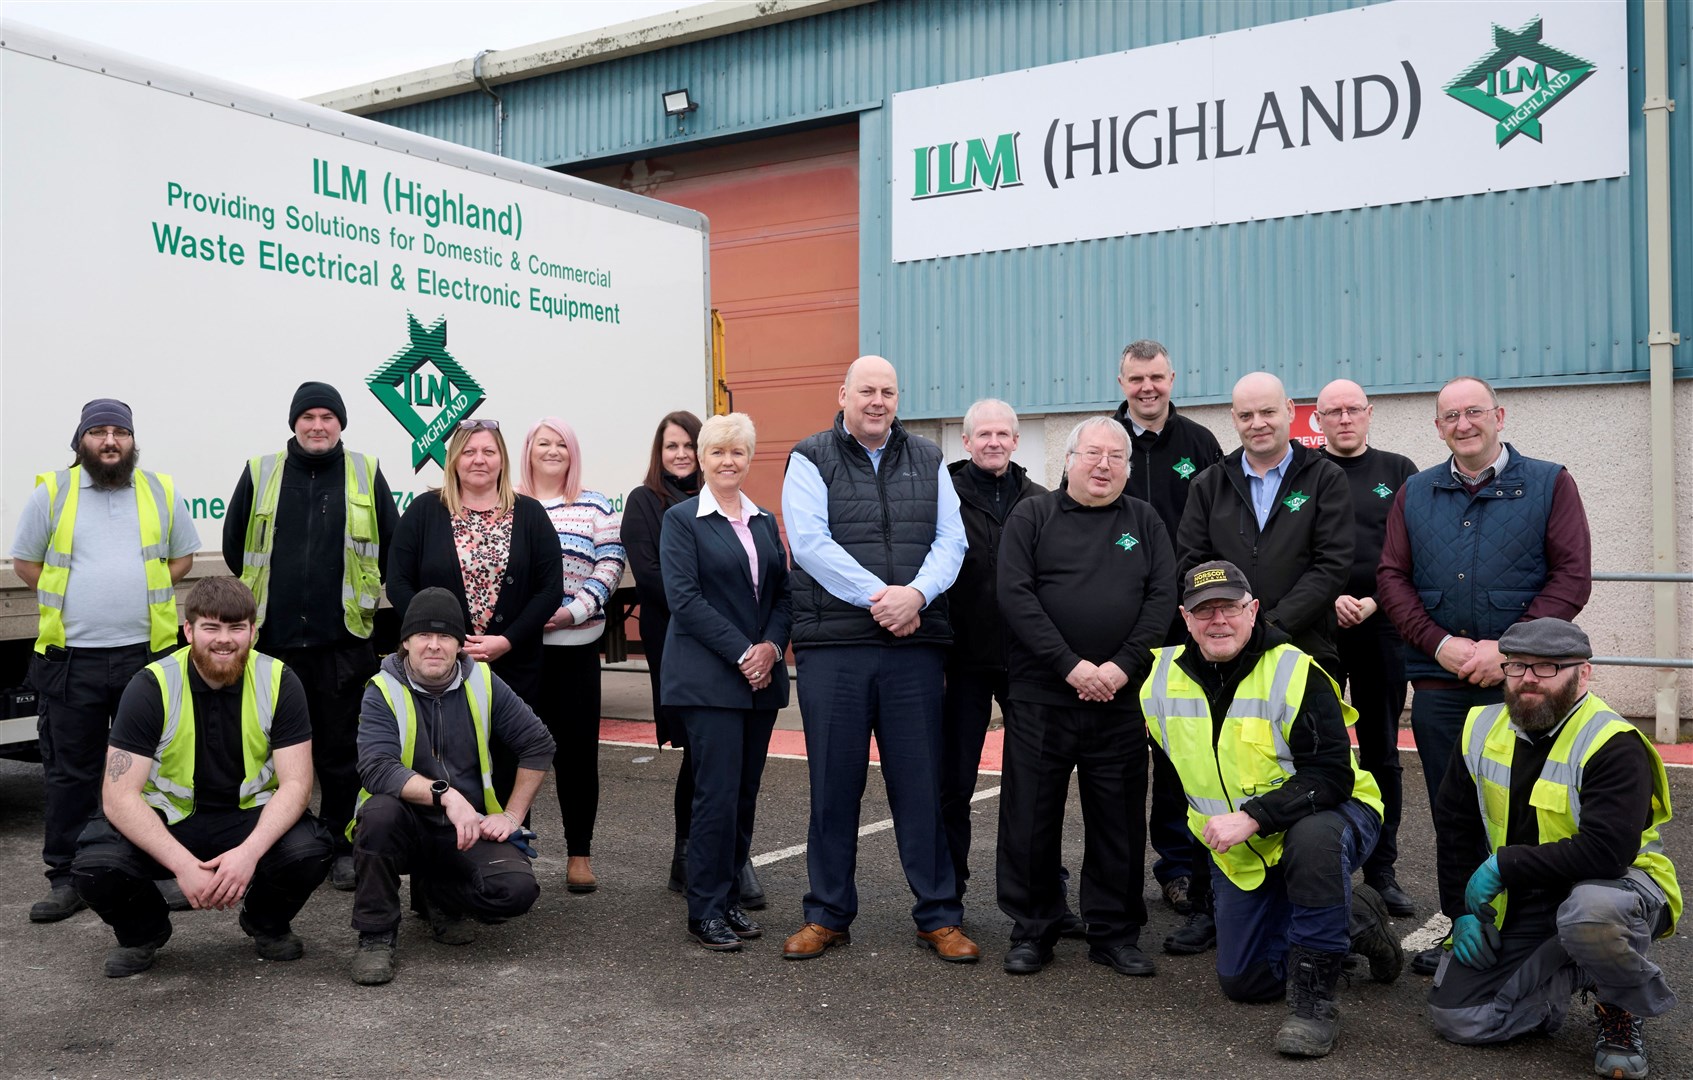 ILM Highland staff are celebrating their 30th anniversary, including (centre left) Sandra Ross, finance manager; and Martin Macleod, chief executive (centre right) with the ILM team.